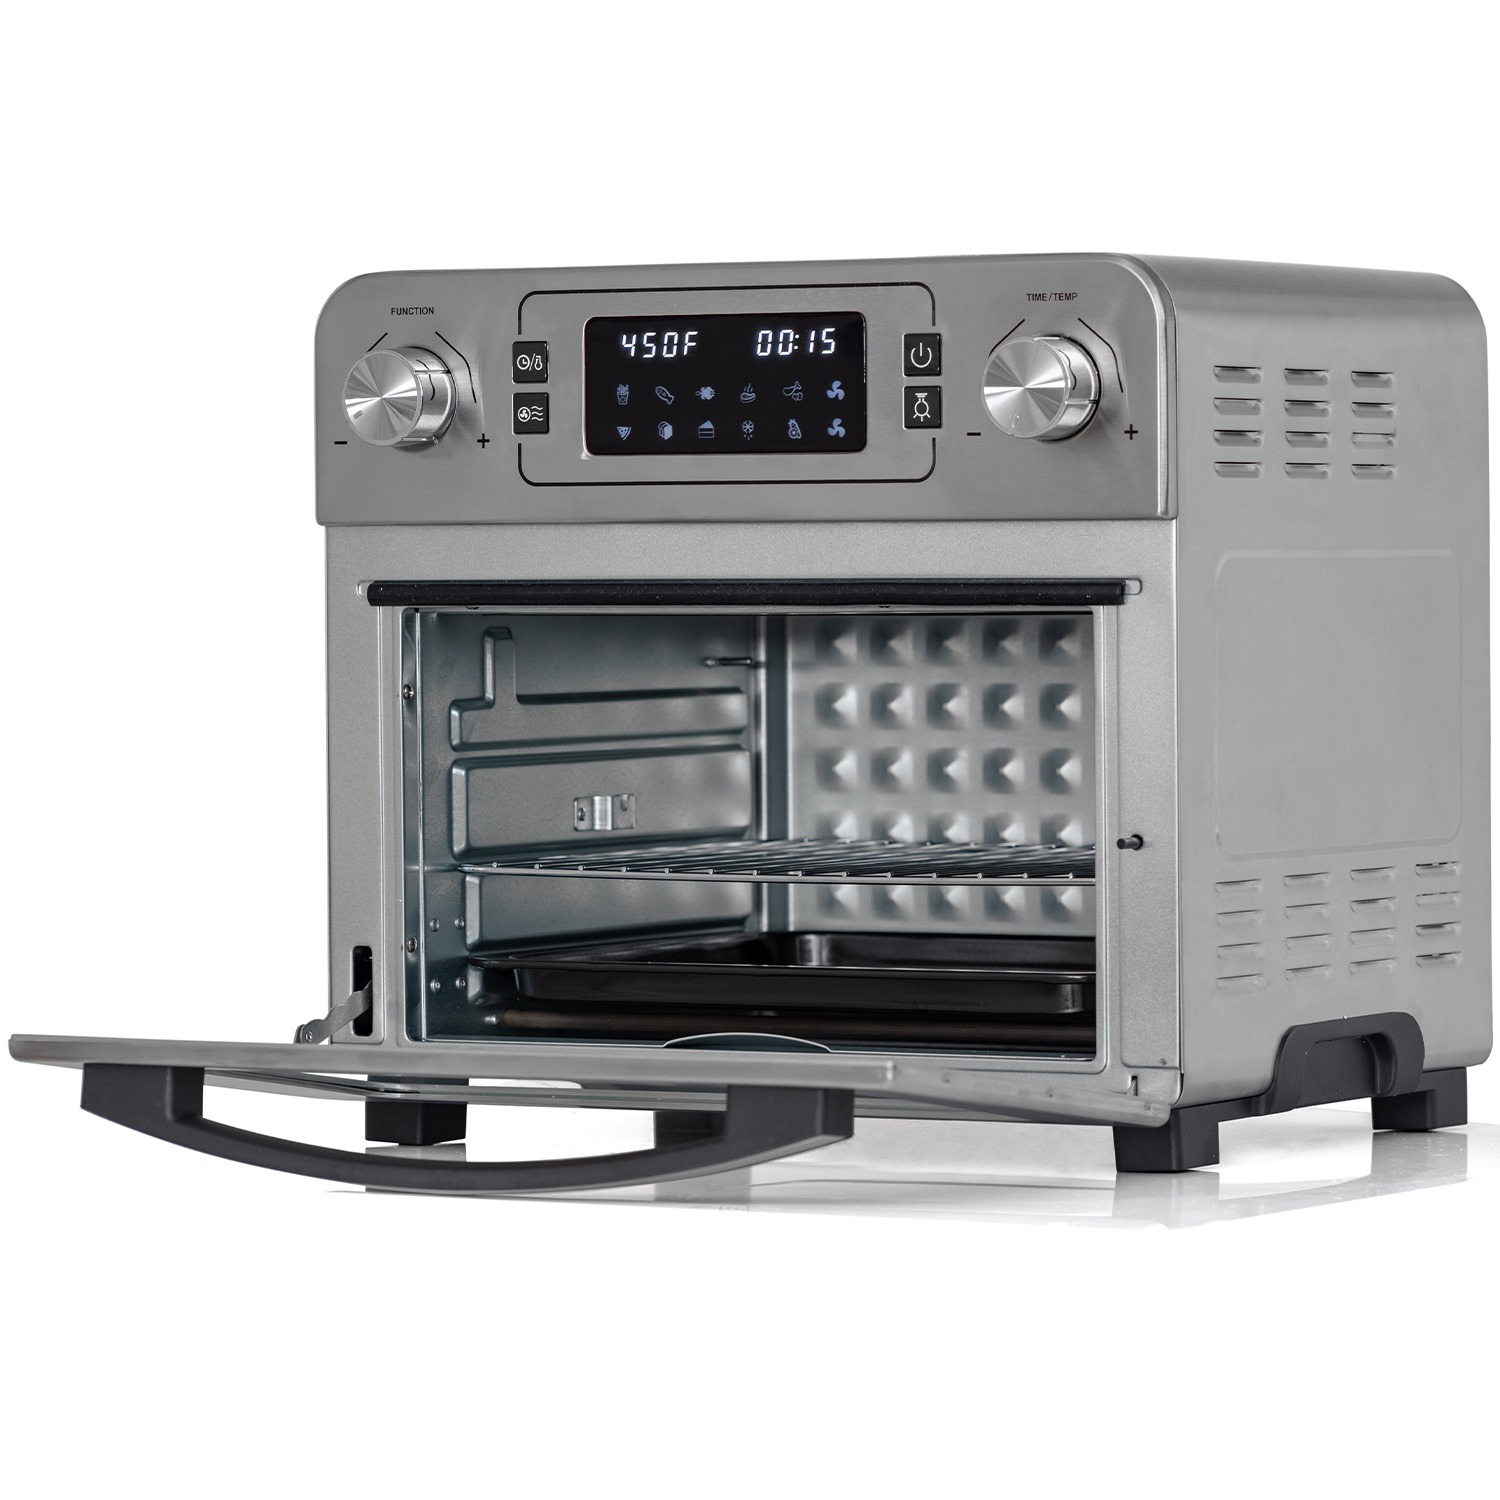 Deco Chef 24 QT Stainless Steel Countertop 1700 Watt Toaster Oven with Built-in Air Fryer and Included Rotisserie Assembly, Grill Rack, Frying Basket, and Baking Pan - image 9 of 11